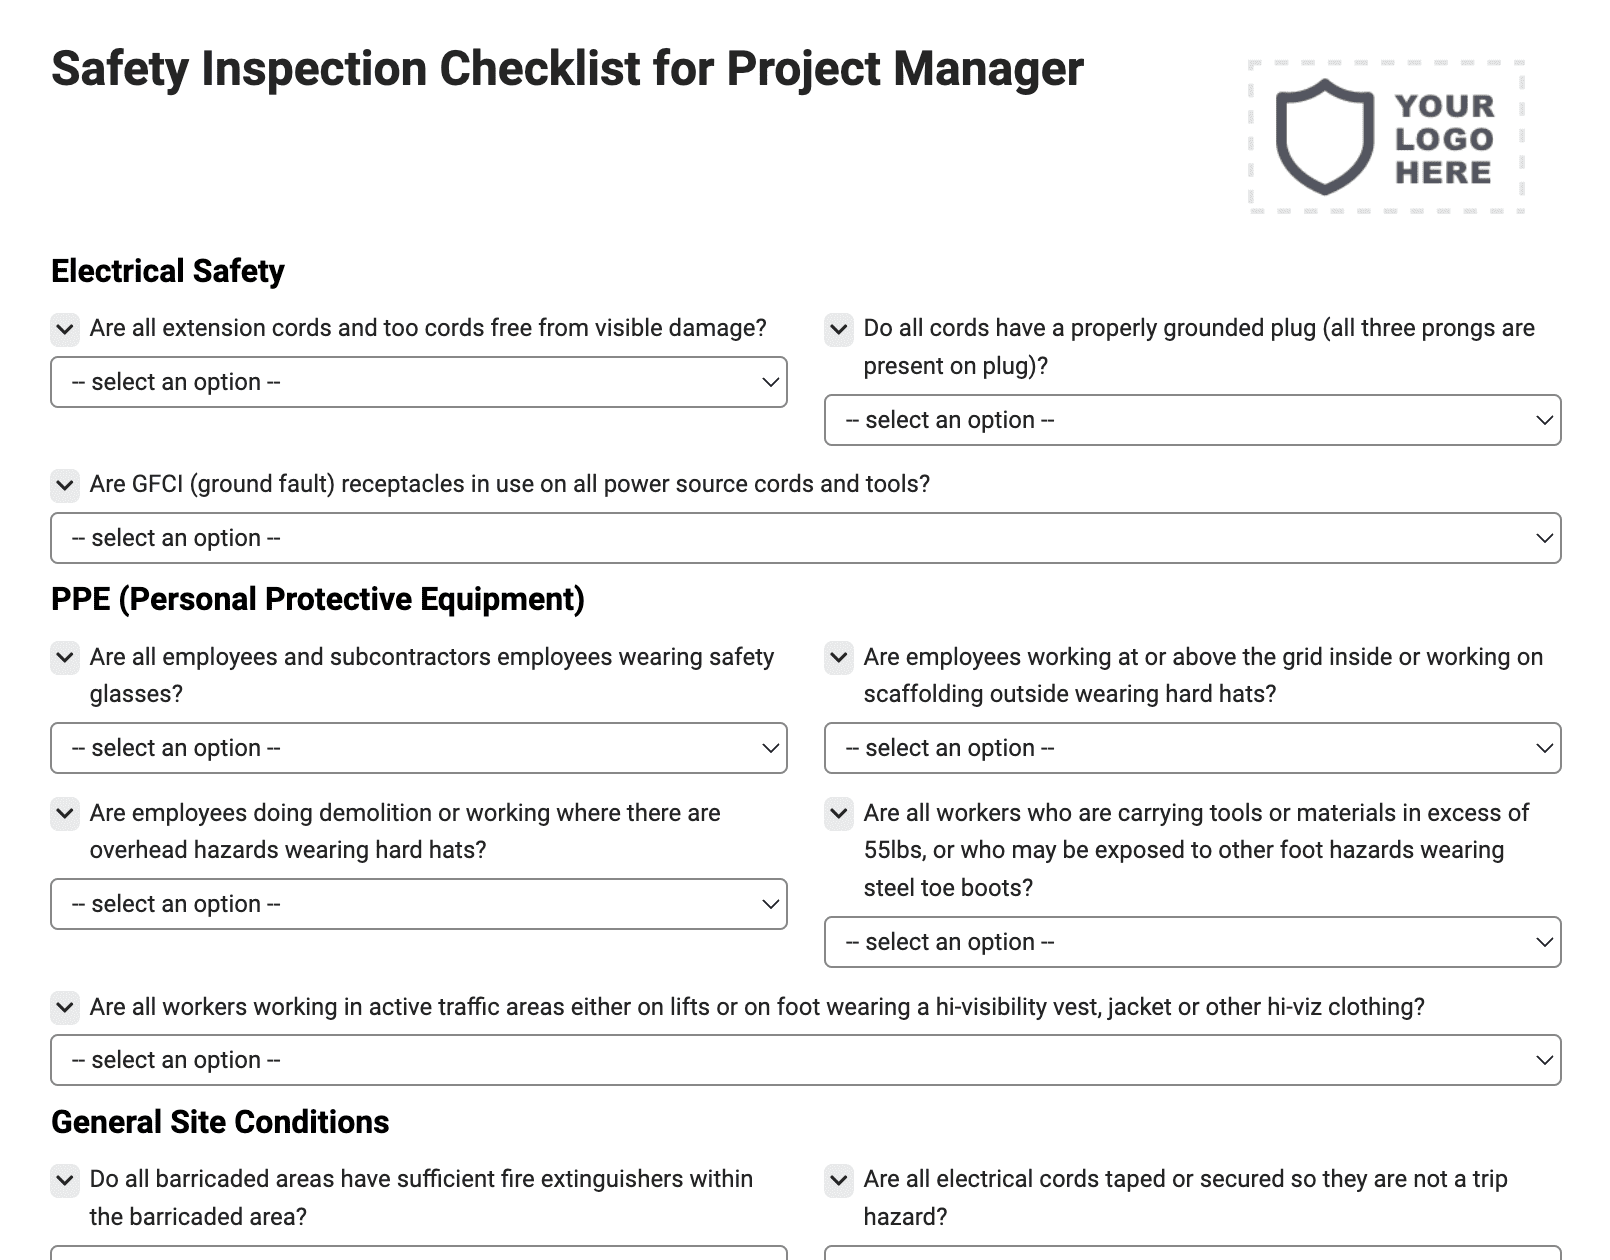 Safety Inspection Checklist for Project Manager